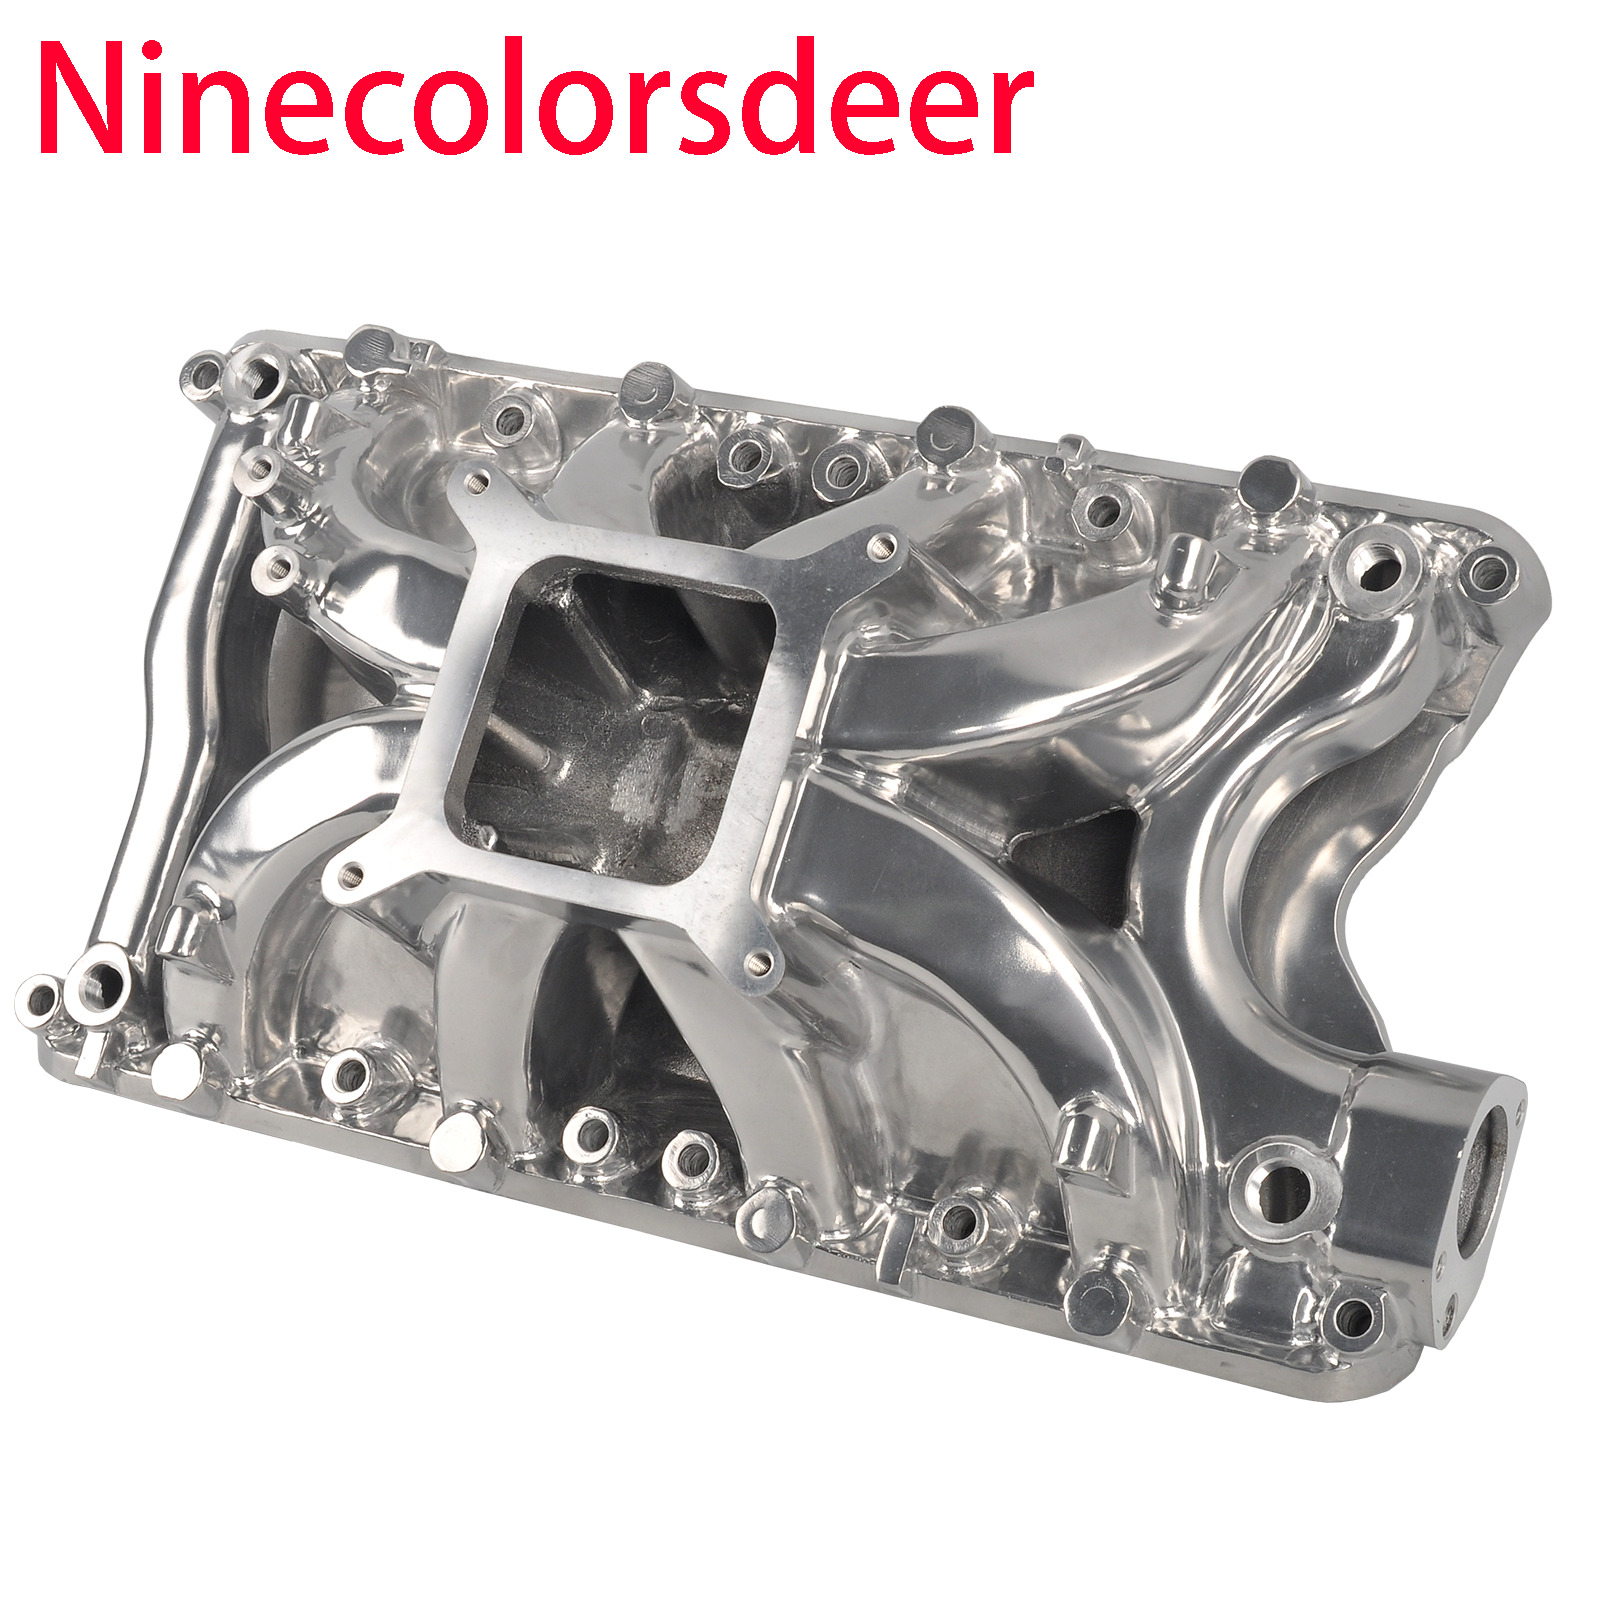 Aluminum Intake Manifold SBF for Small Block For Ford 351W Windsor V8 Air Gap